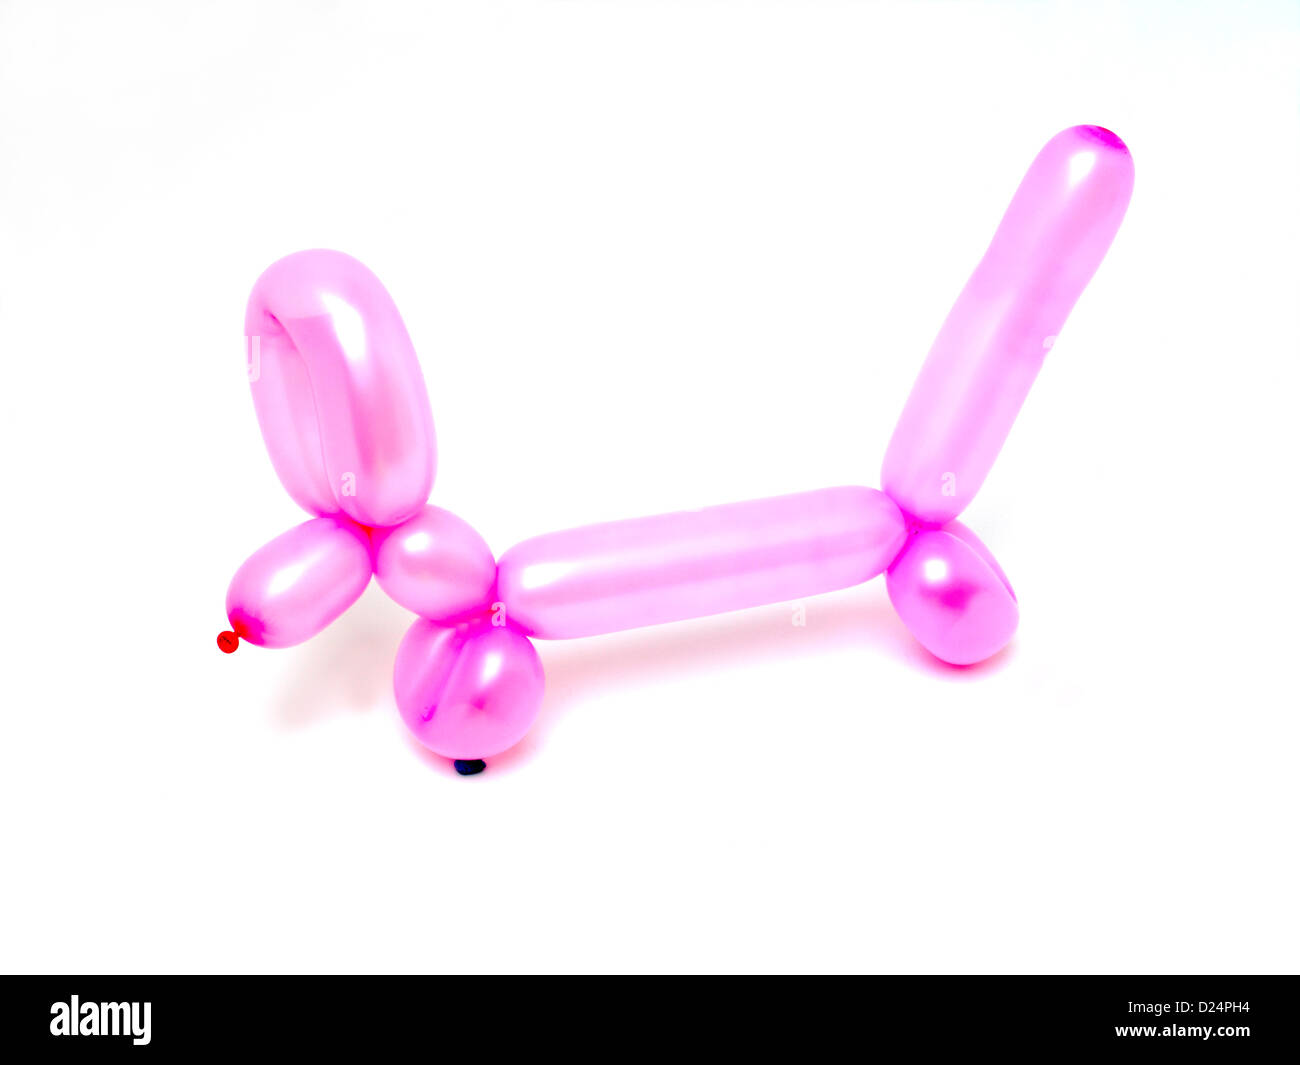 Balloon animal Cut Out Stock Images & Pictures - Alamy